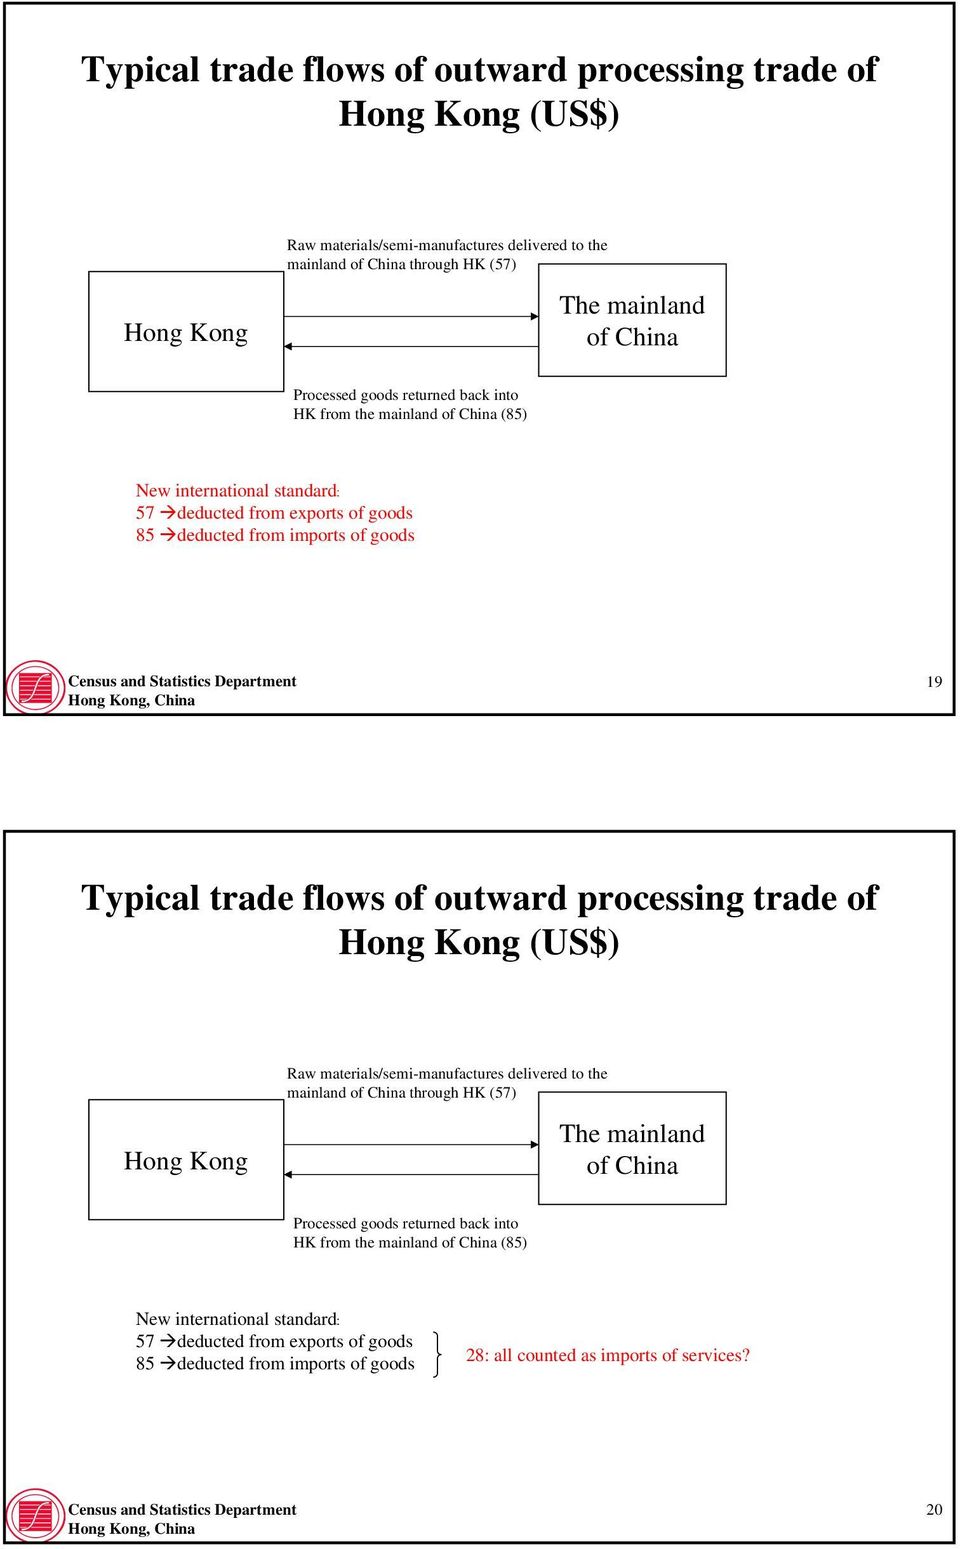 returned back into HK from the mainland of China (85) New international standard: 57 deducted from exports of goods 85 deducted from imports of goods 28: all counted as imports of